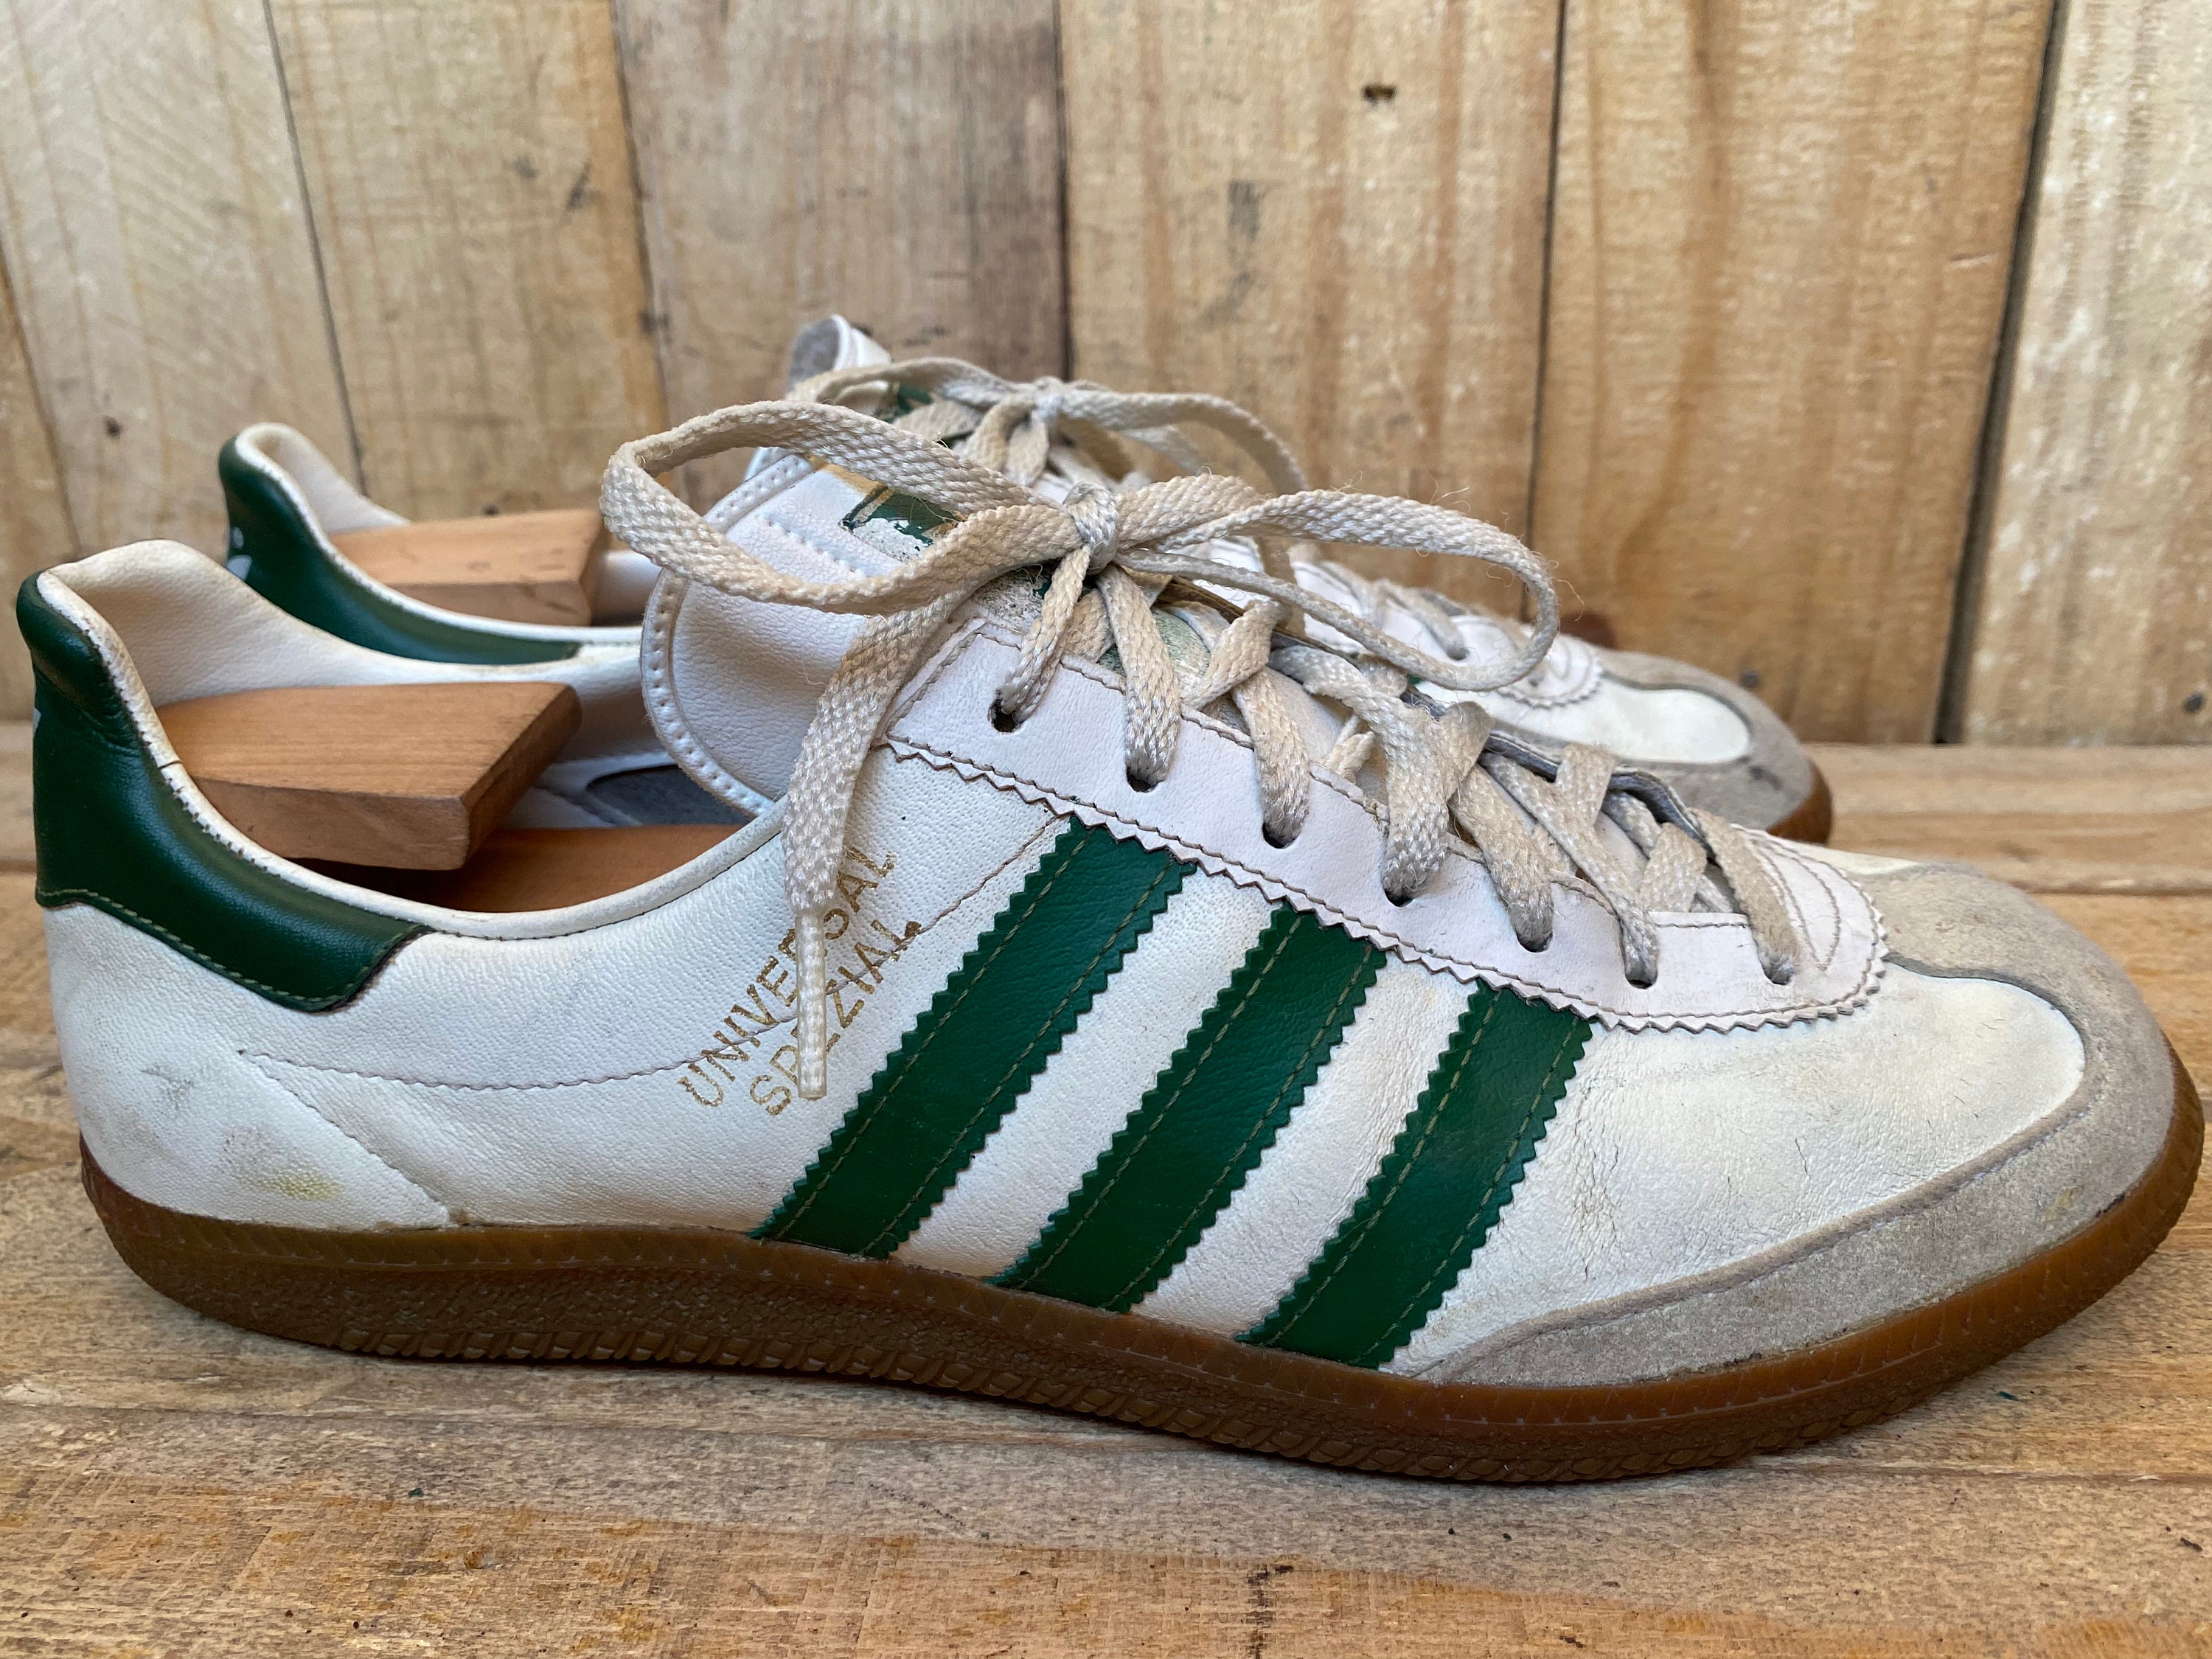 Vintage 80s/70 Adidas Universal Spezial Made West - Etsy